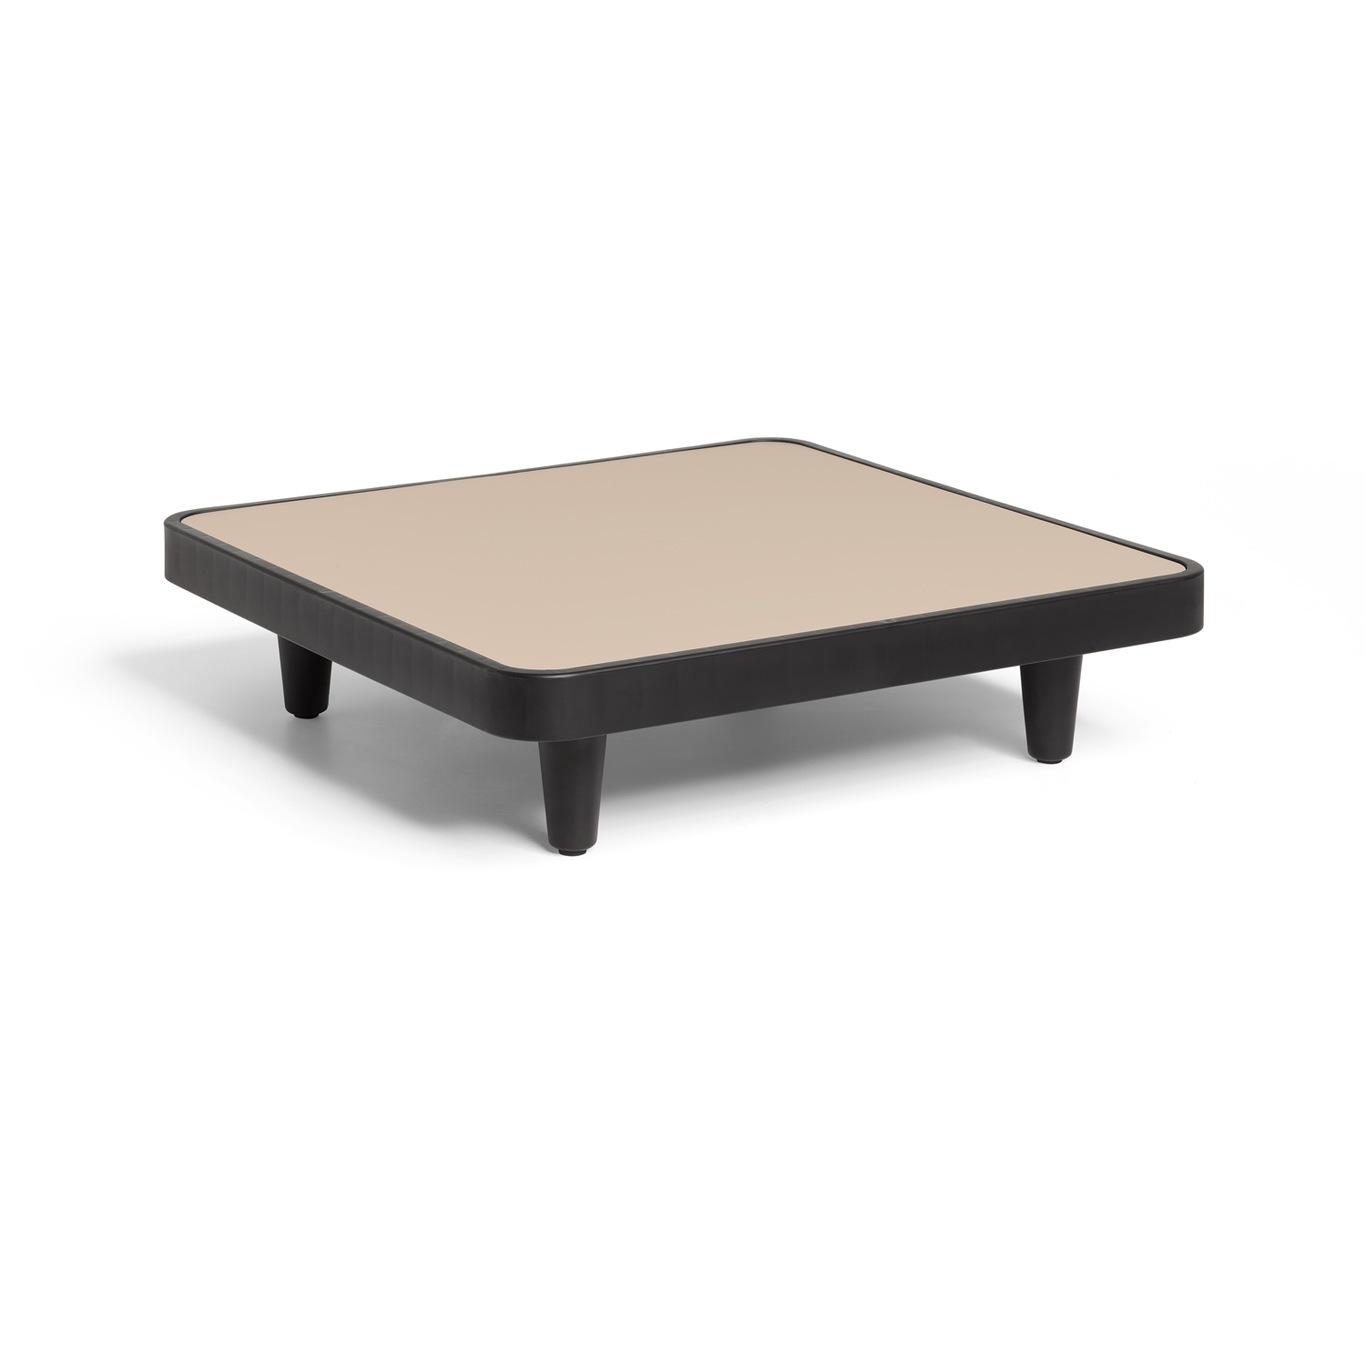 Paletti Table, Light Taupe